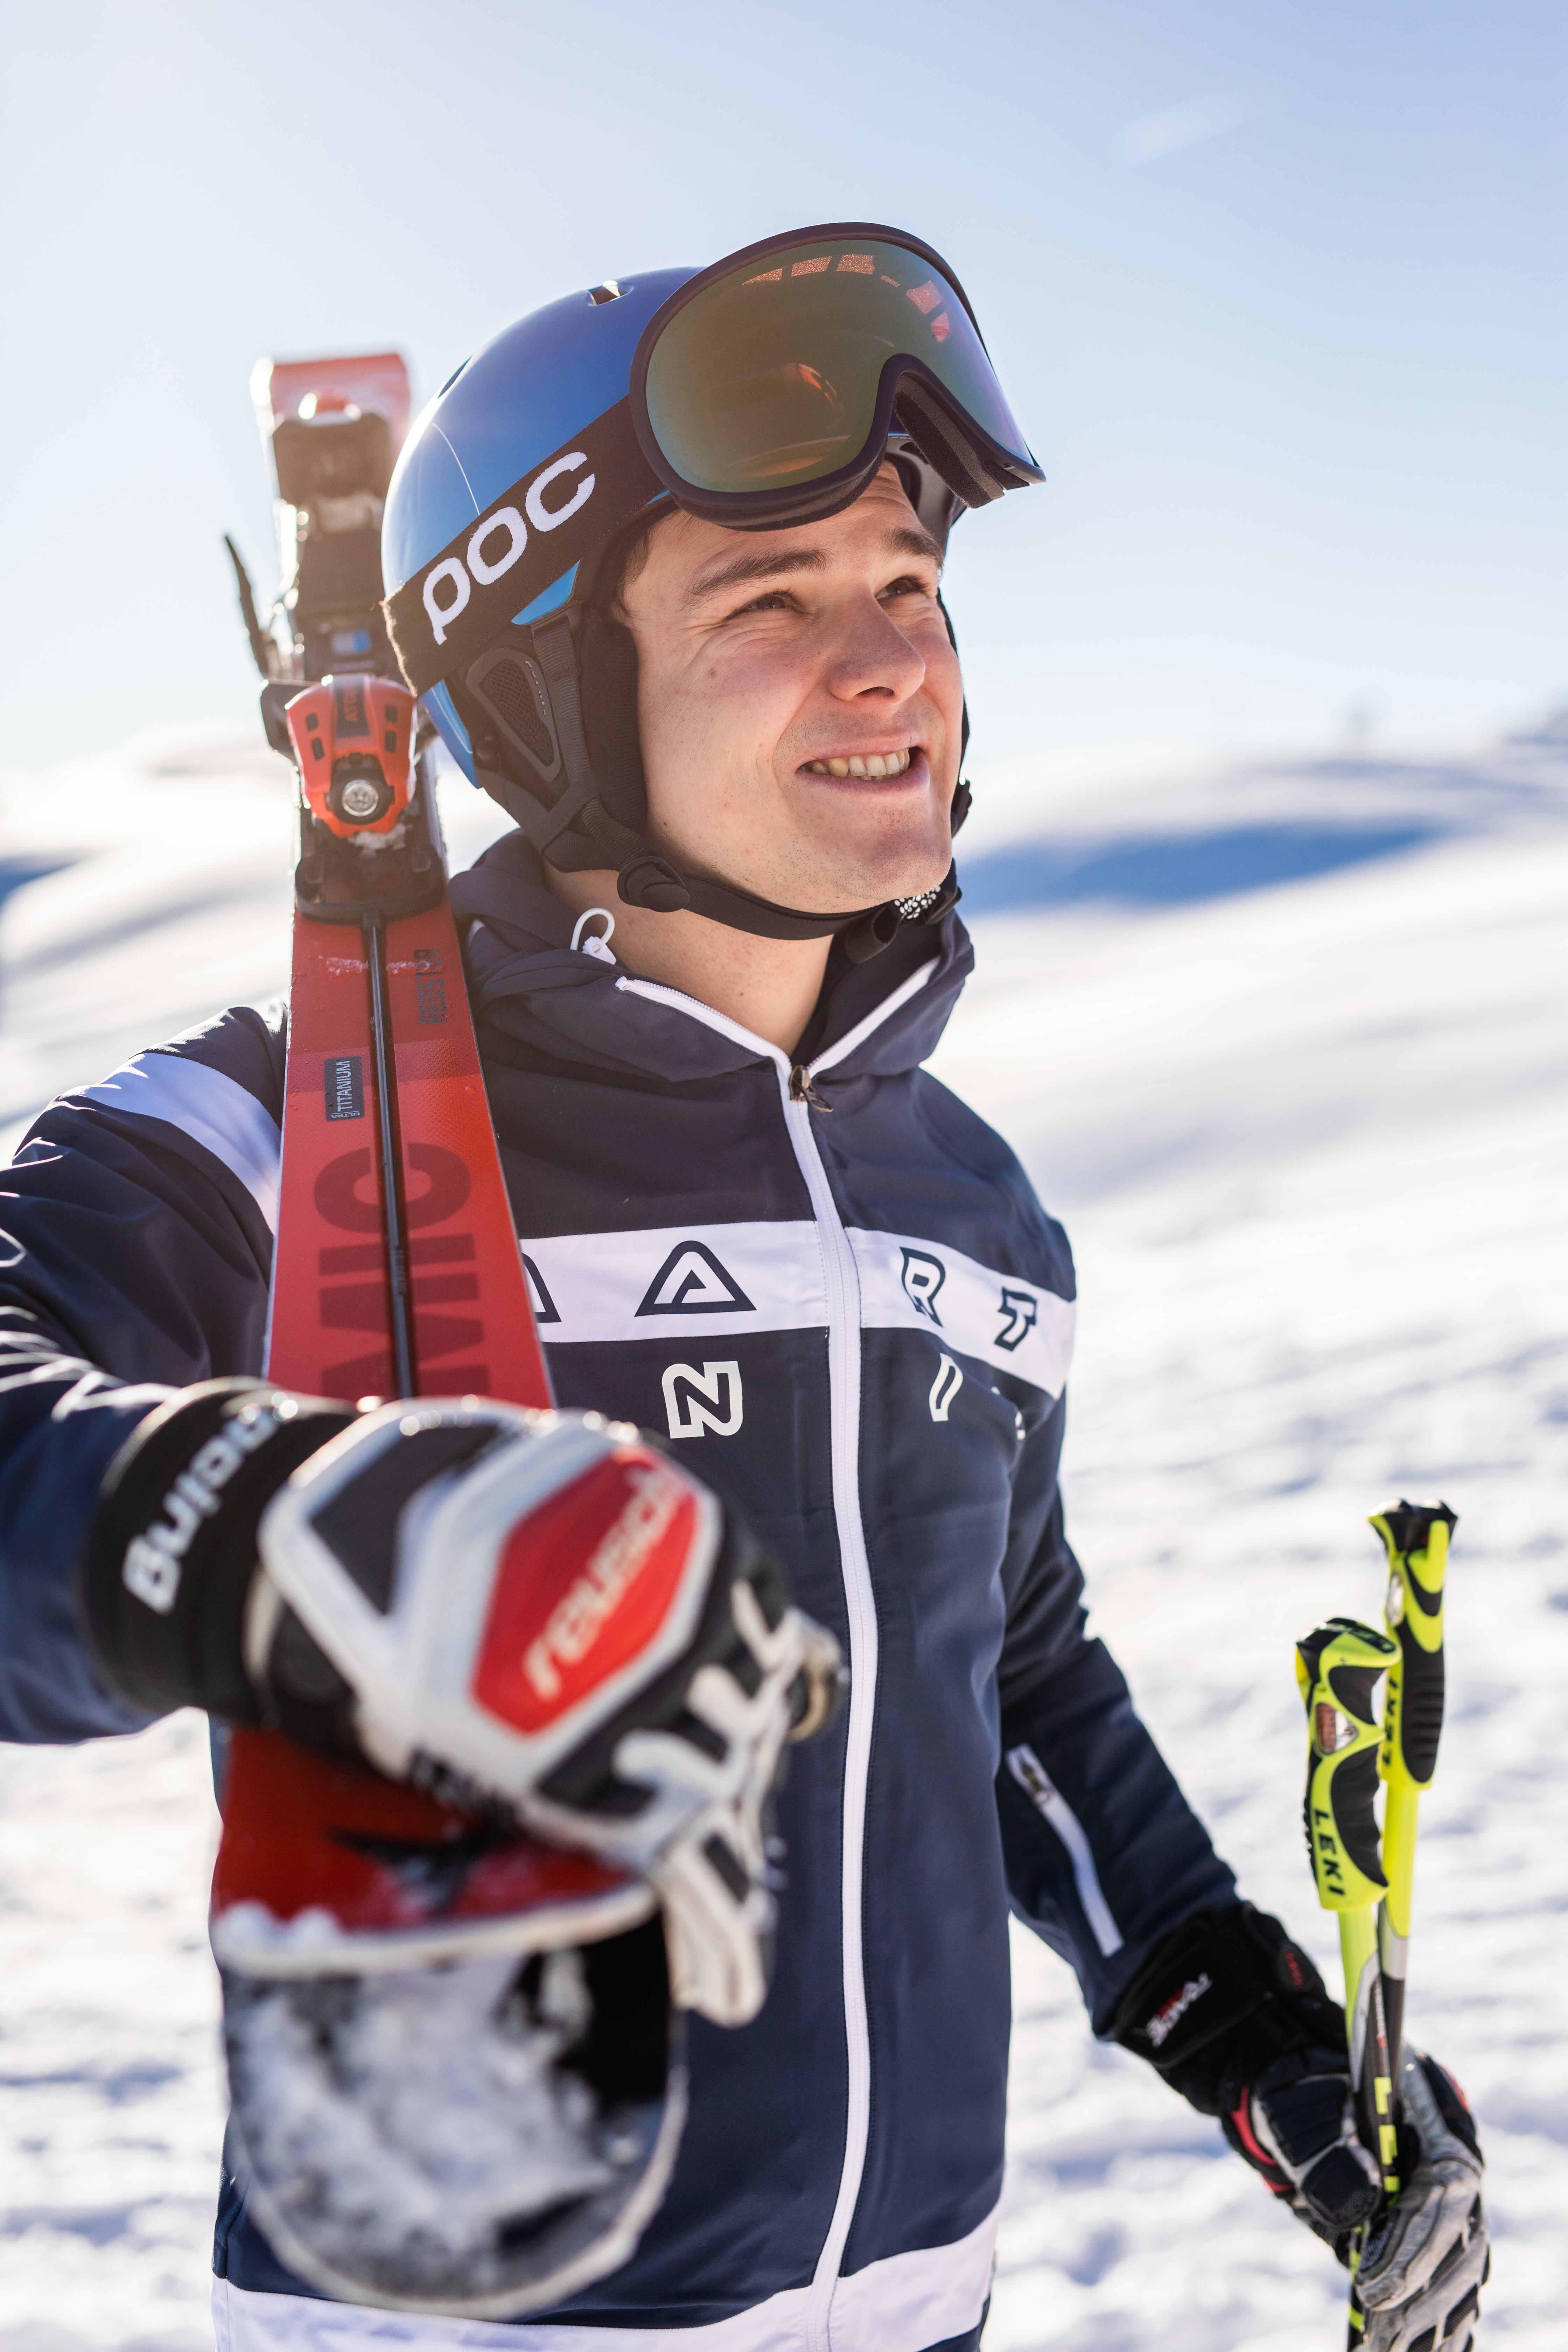 2020-01-21-Sportwelt-Skishooting-by-Michael-Groessinger-_A2A9317